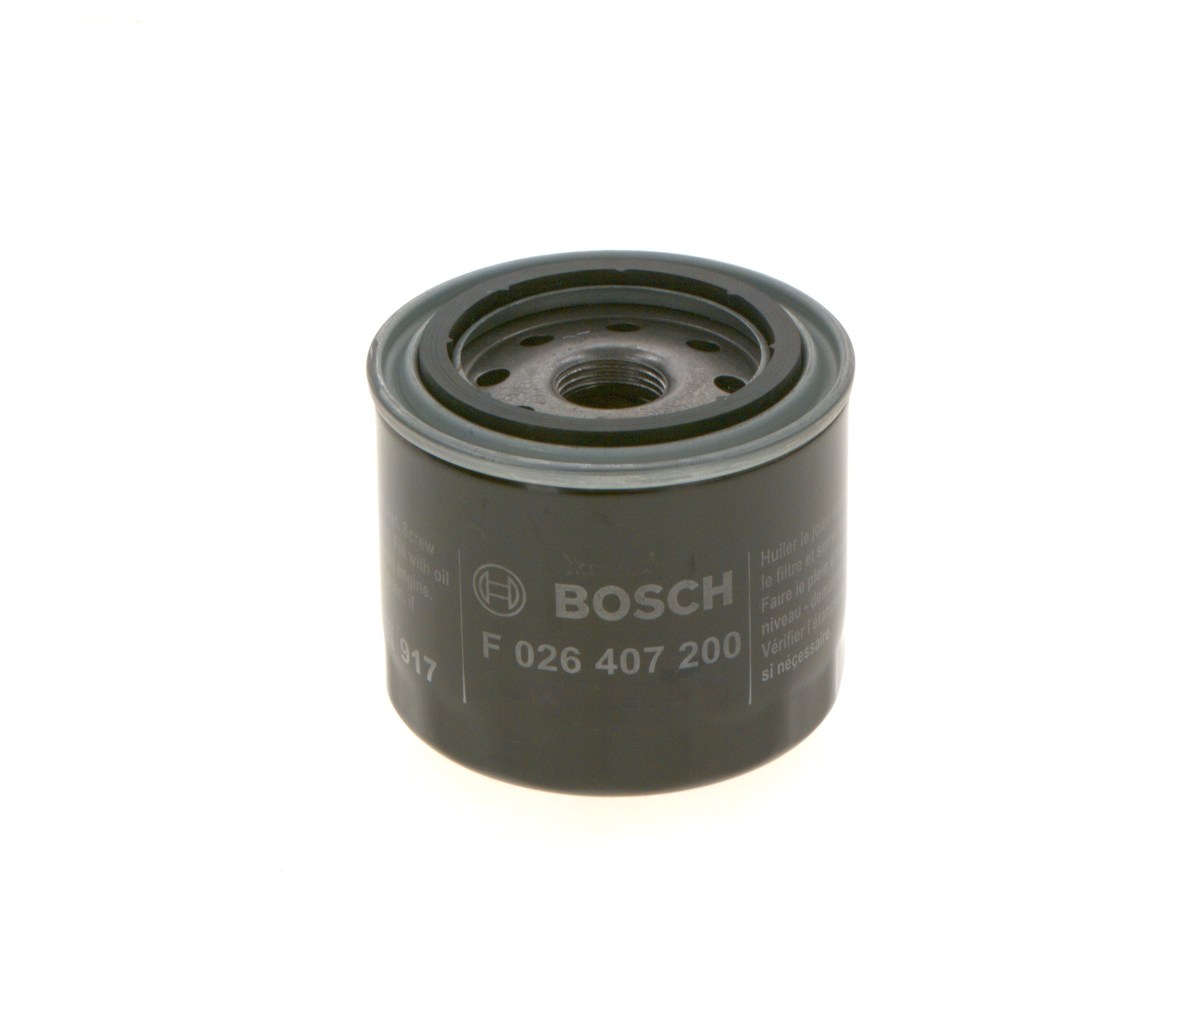 BOSCH F 026 407 200 Oil filter M 20 x 1,5, with one anti-return valve, Spin-on Filter